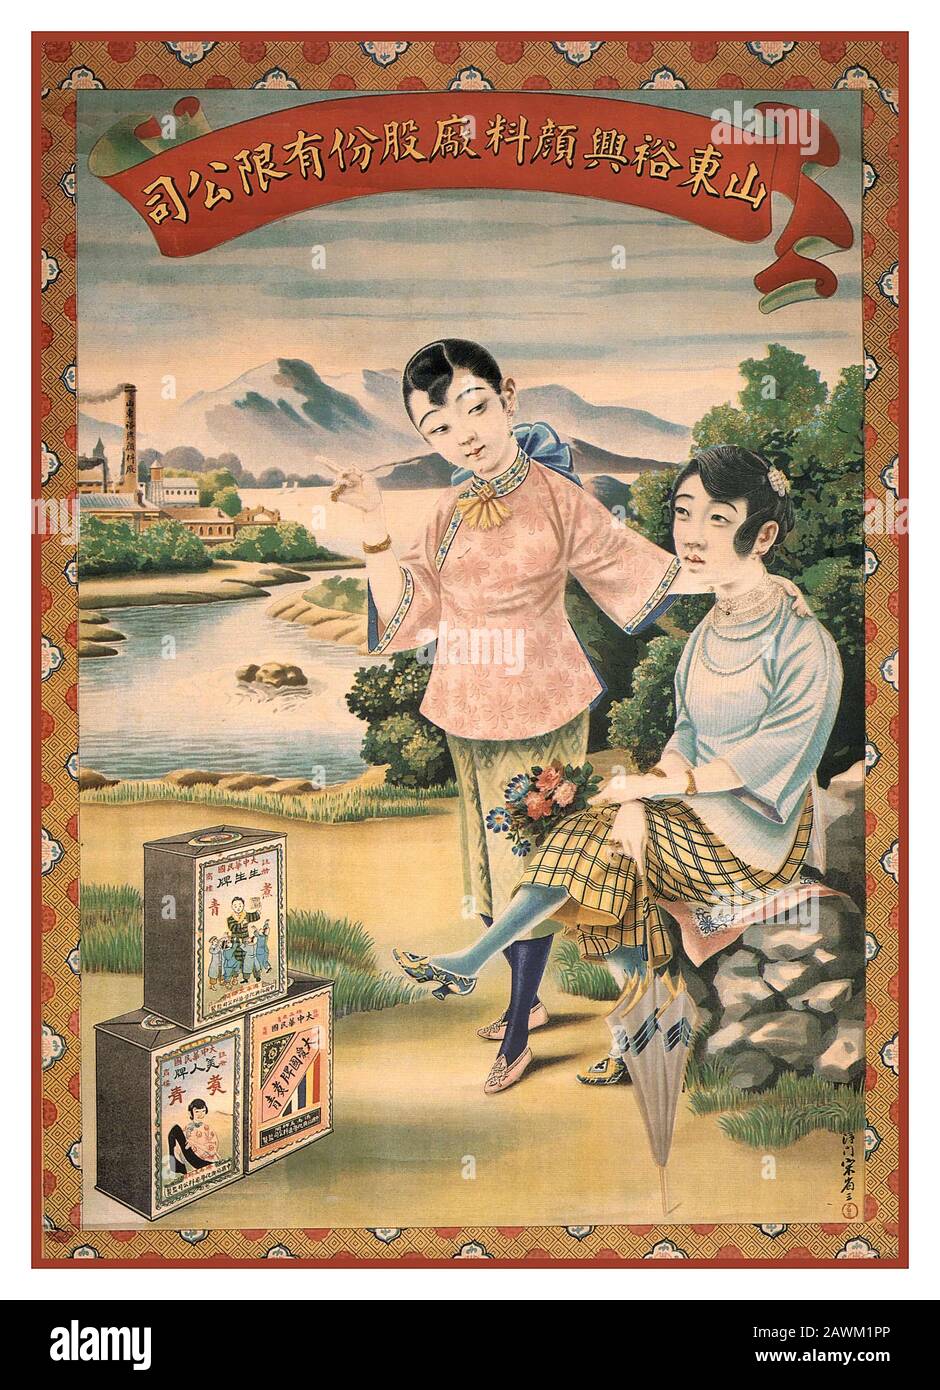 Vintage  Chinese Shanghai Poster Chinese advertising artwork by Yu Xing Dye Factory of Shandong Province. Shanghai Chinese Posters. Stock Photo